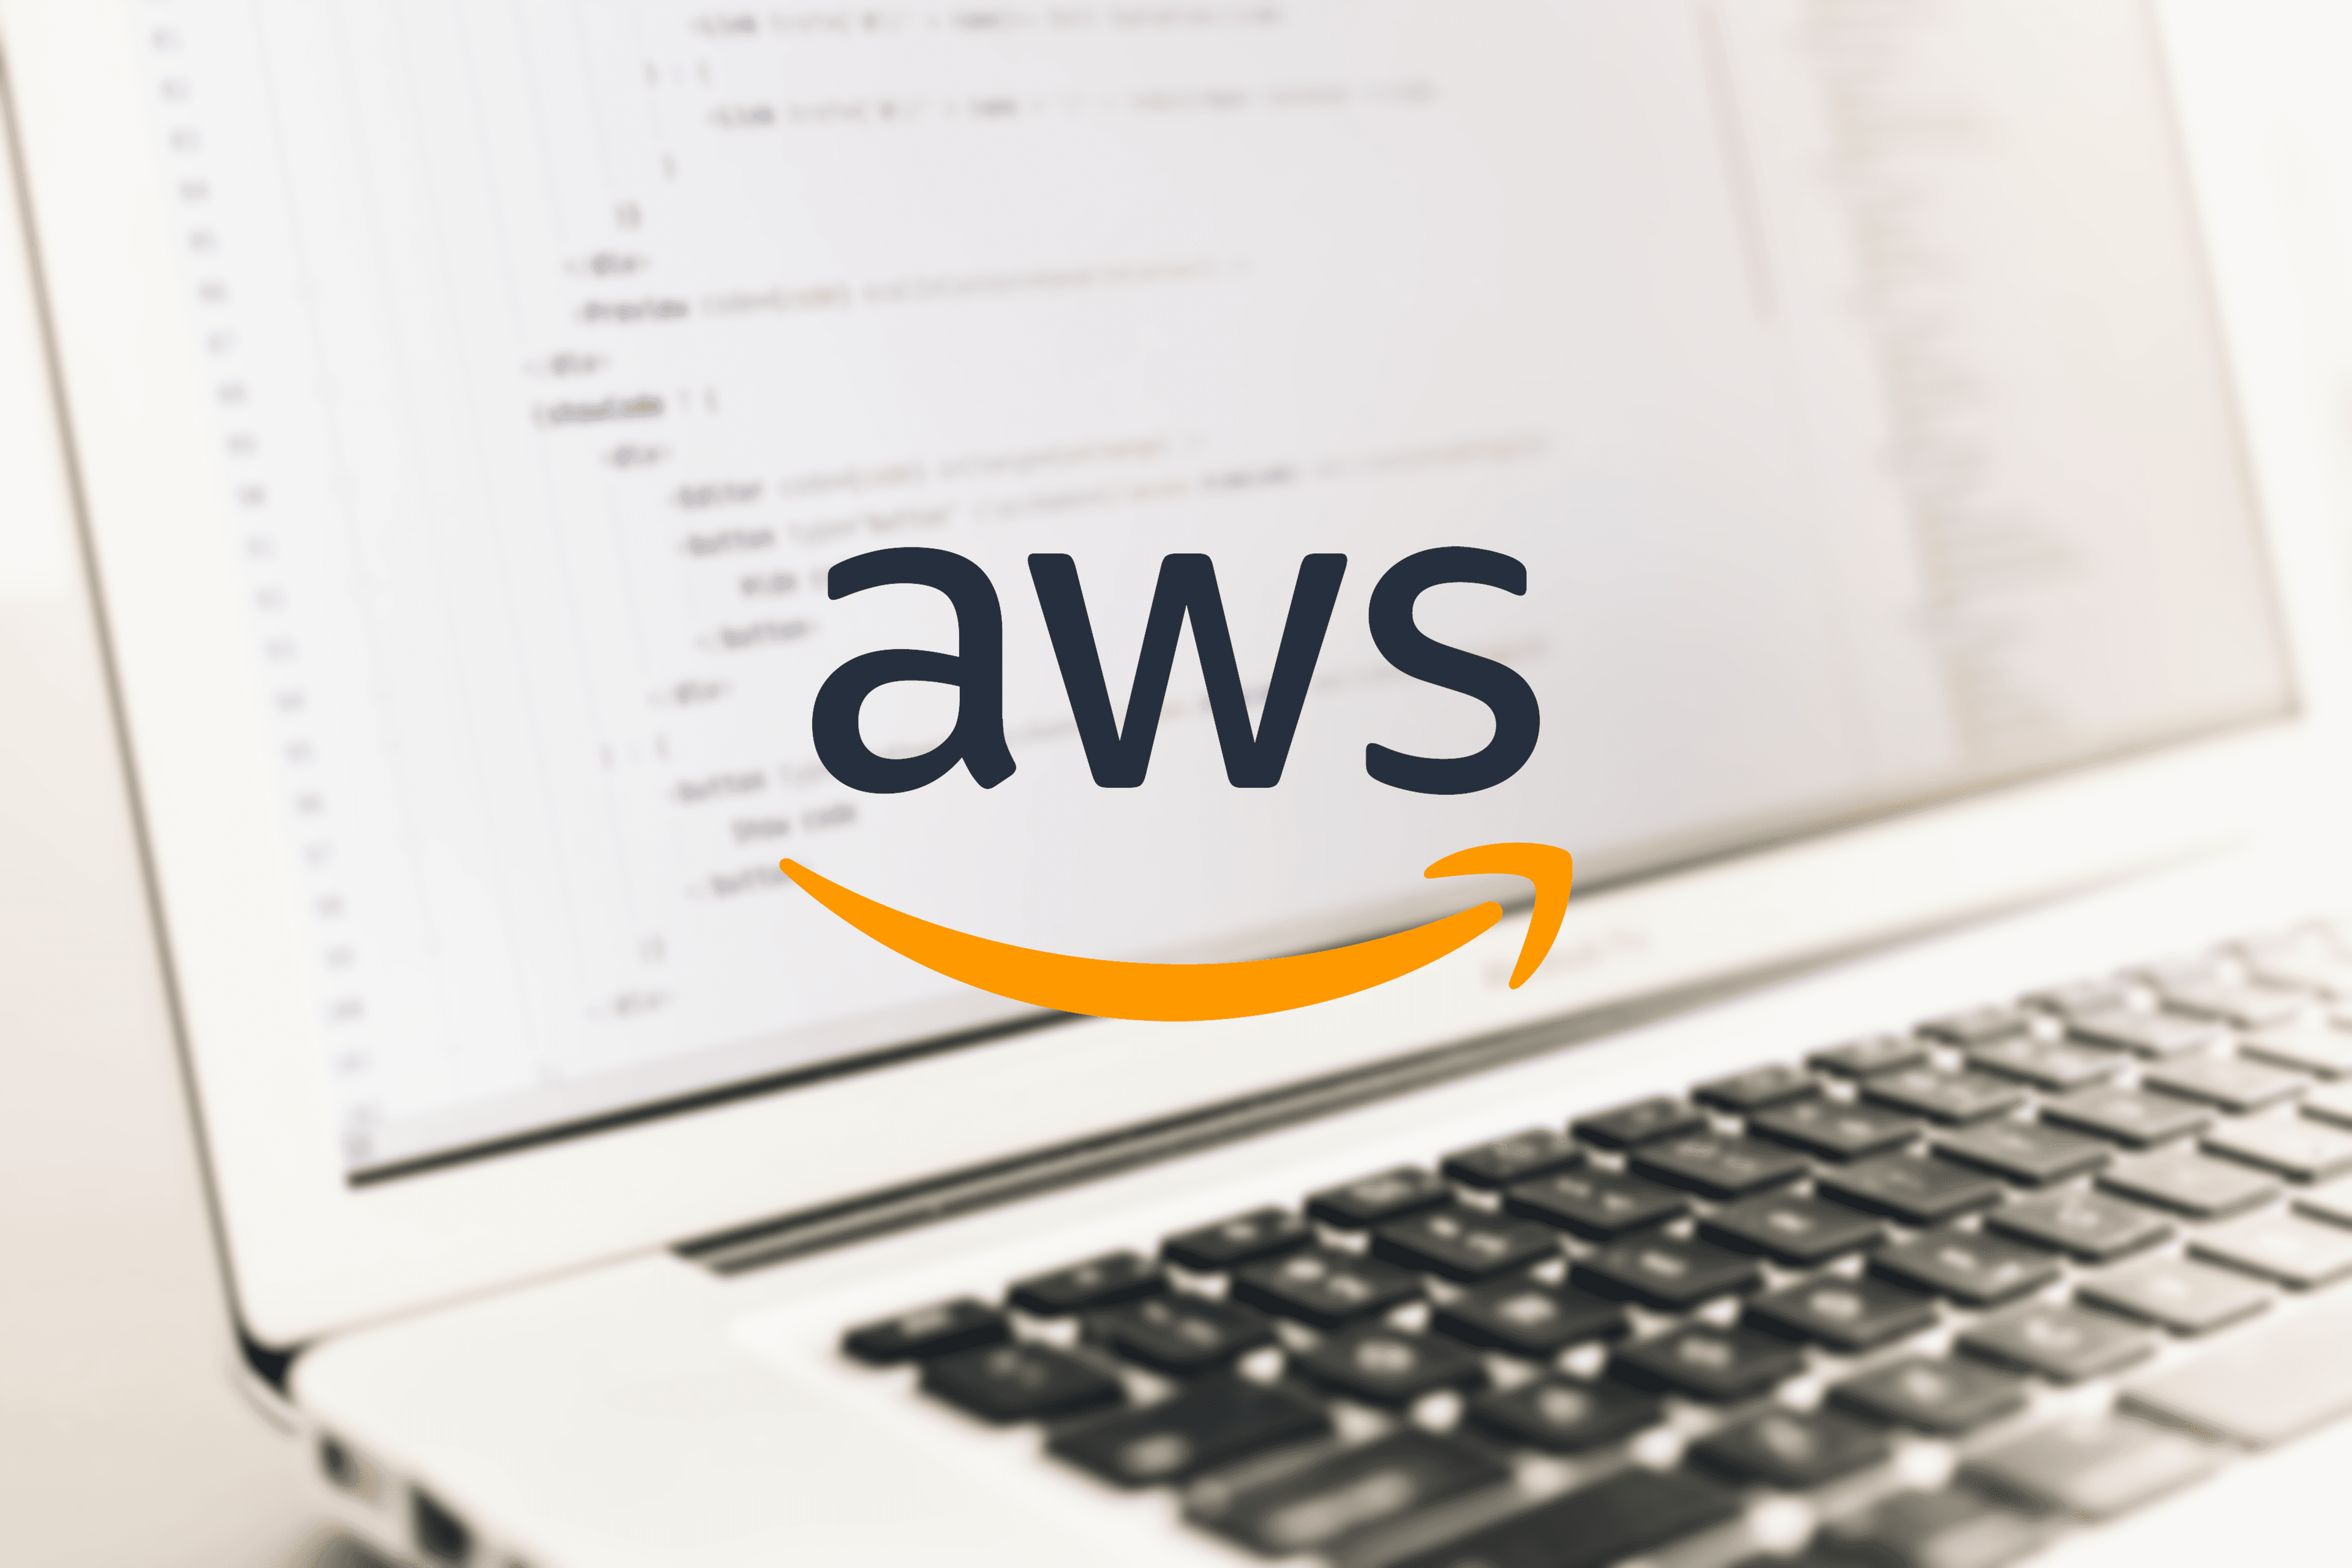 Code on laptop screen with AWS logo in the foreground